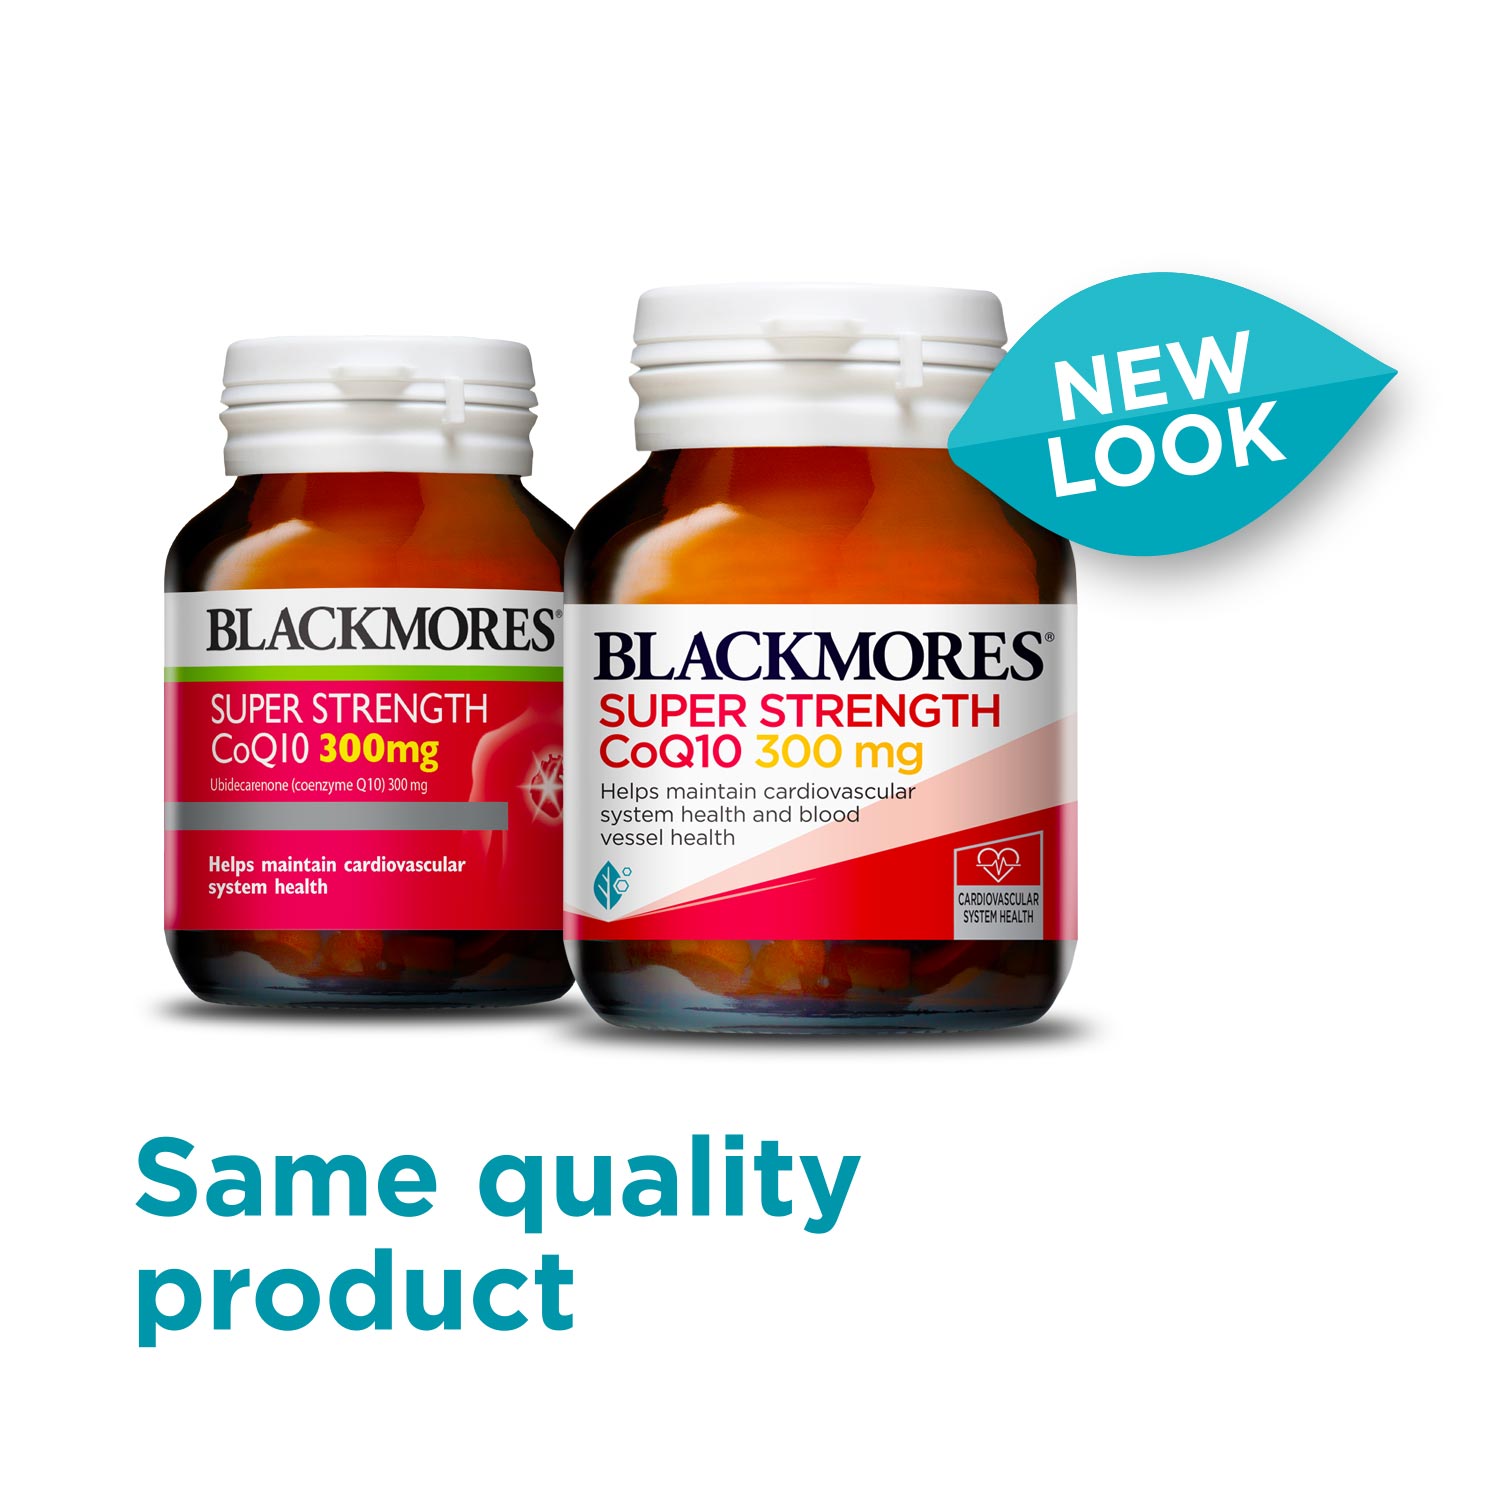 Blackmores Super Strength CoQ10 300mg new look label 